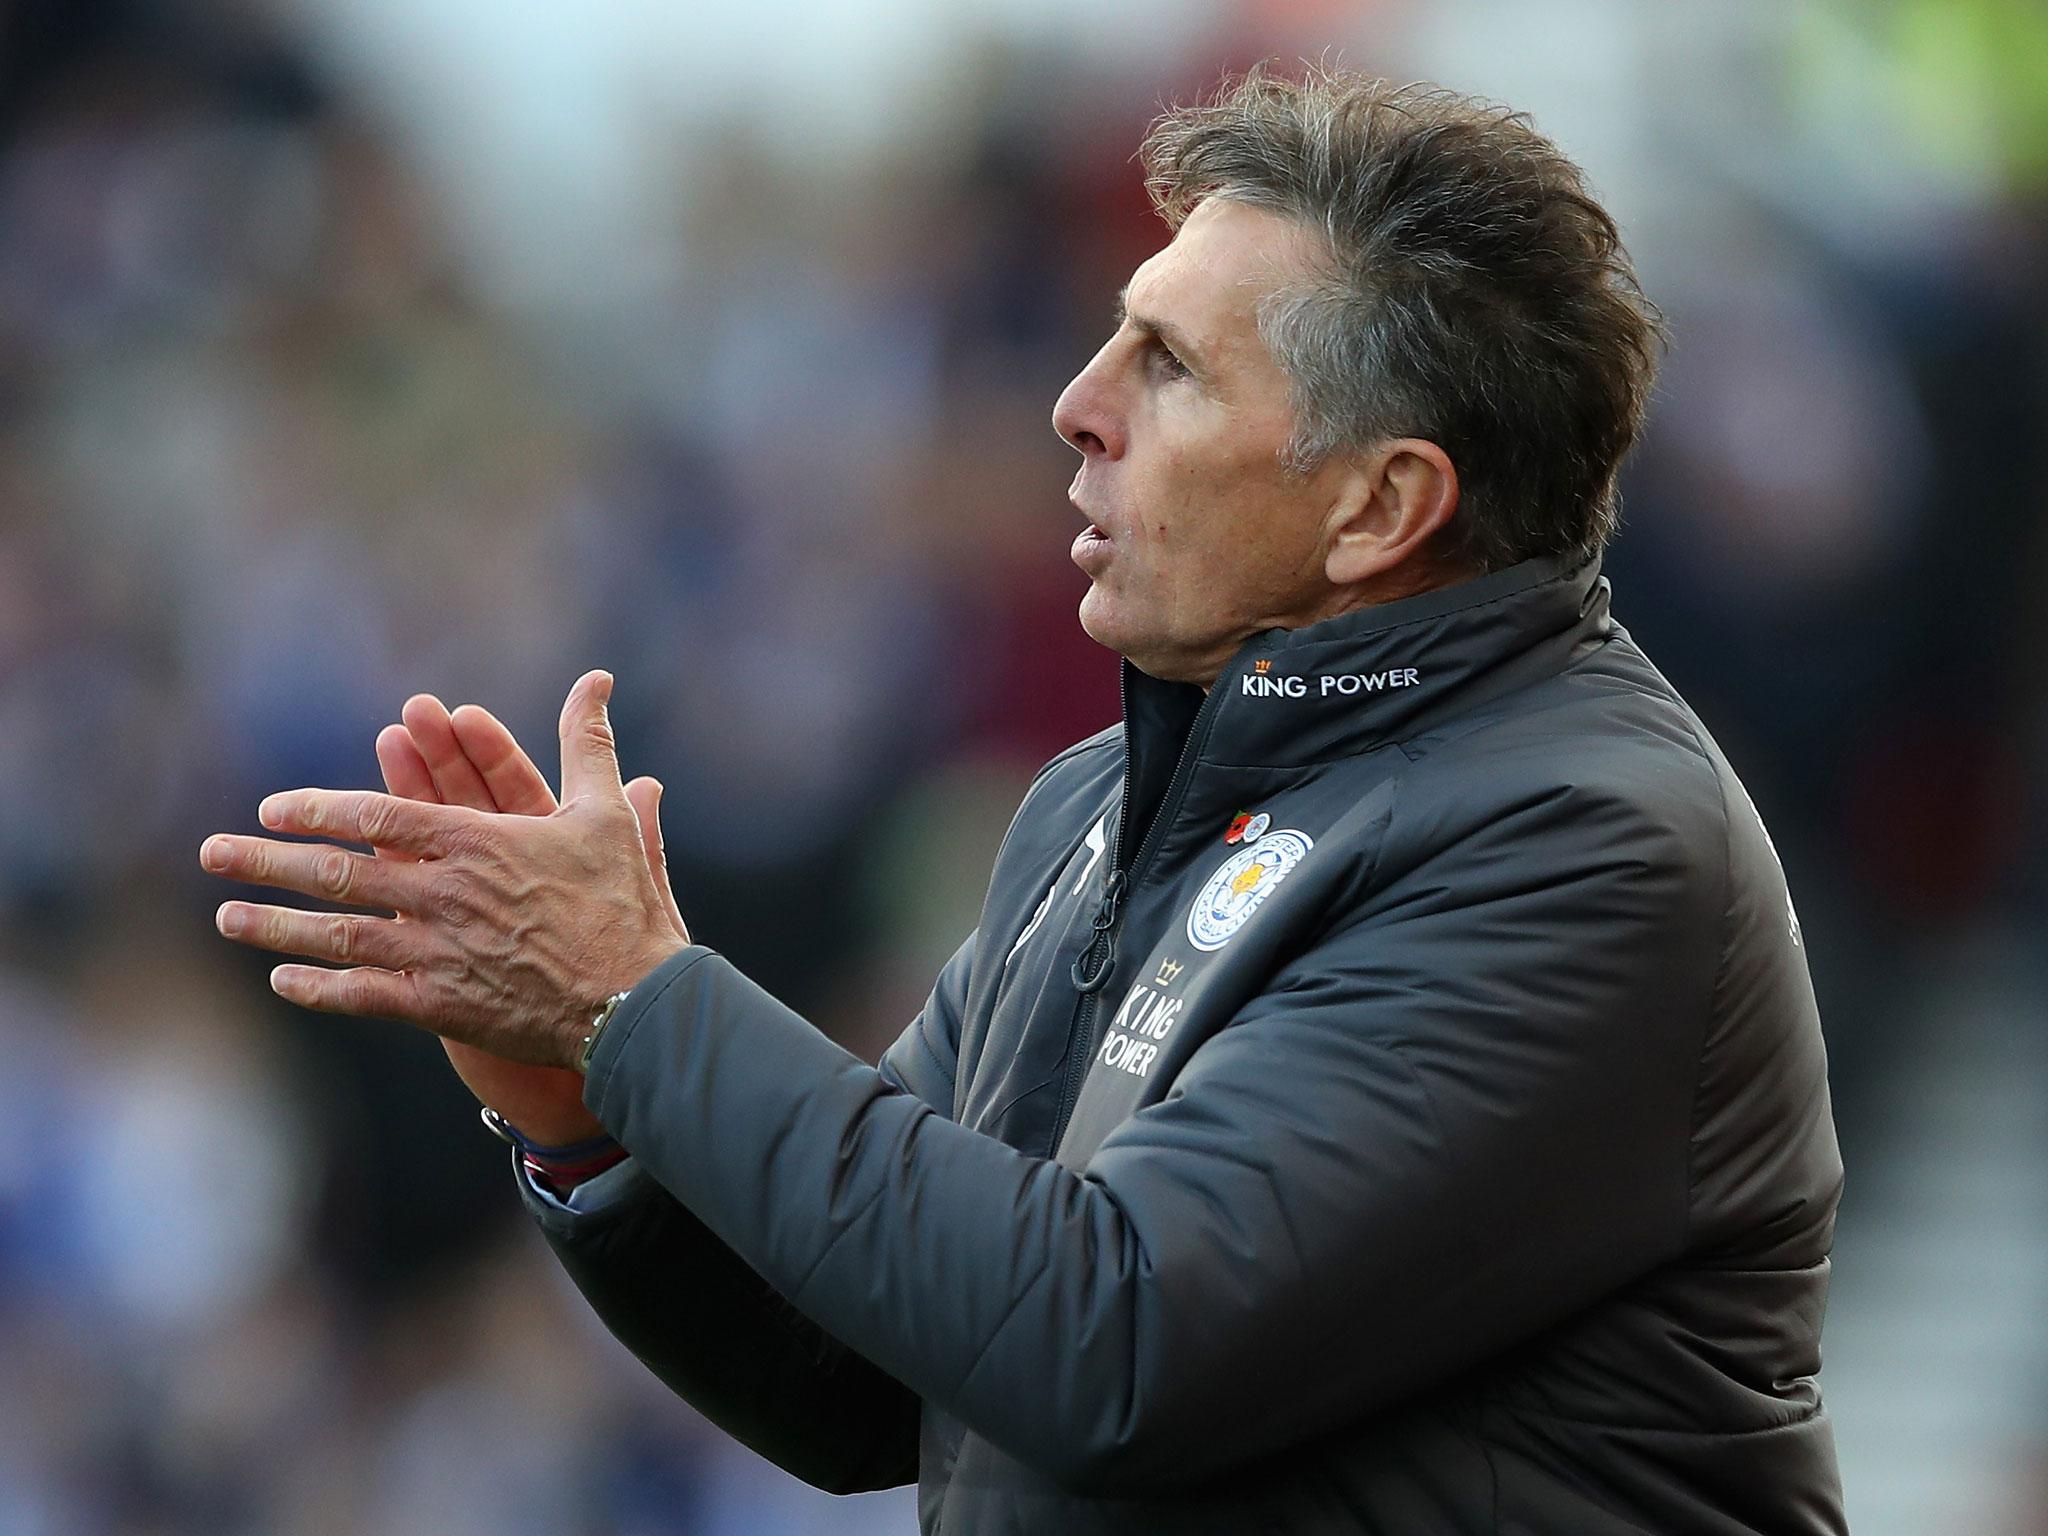 Claude Puel will know he has plenty of work to do with this Leicester side